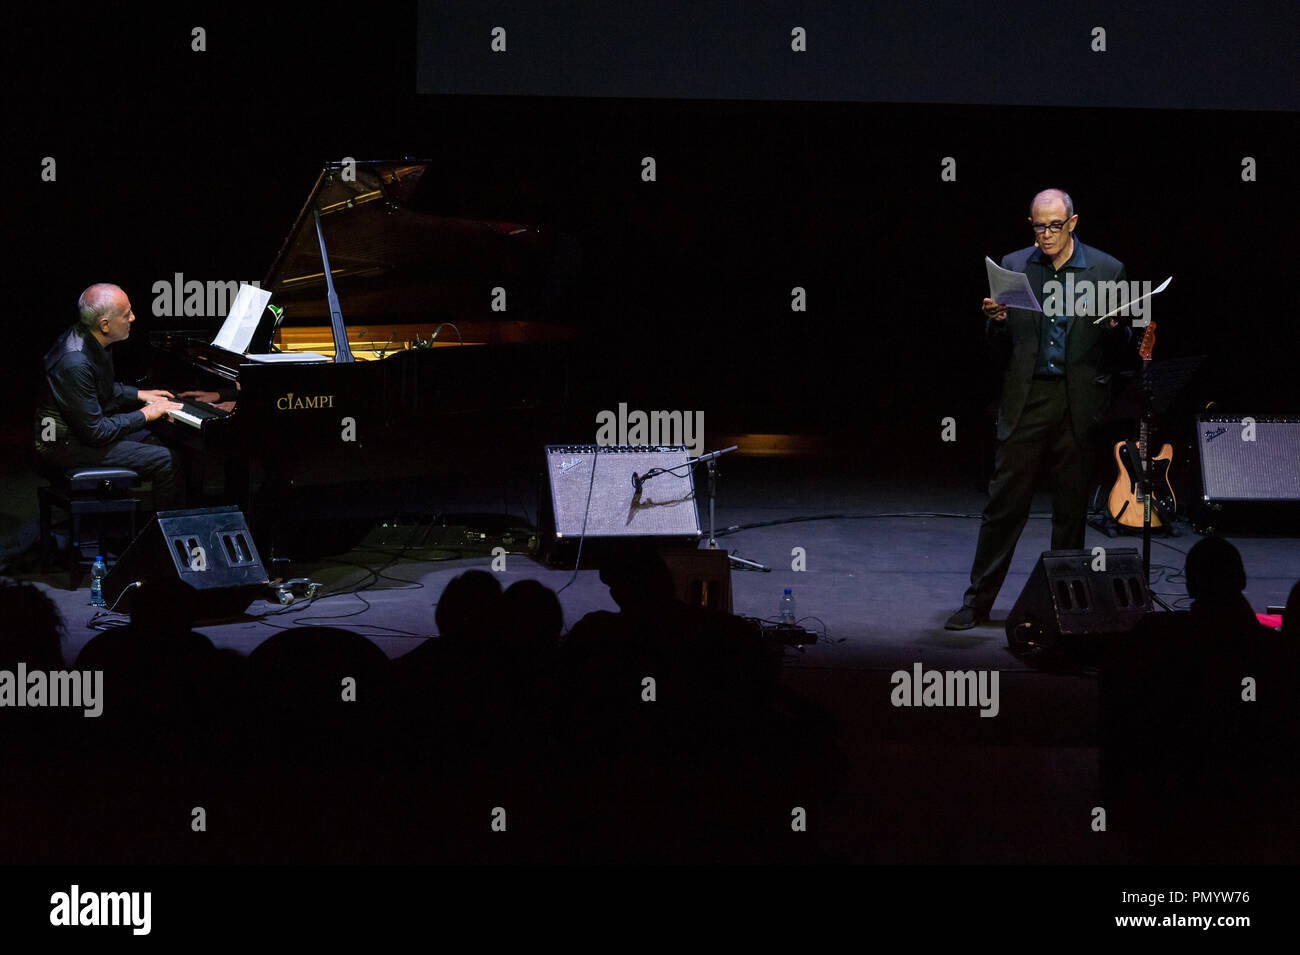 Danilo Rea at the piano and Urbano Barberini, narrator, presented on 18/9/2018 at the Auditorium Parco della Musica in Rome at the Franco-Italian Festival of jazz and improvised music 'Una striscia di Terra Feconda', the pièce by Nello Trocchia (journalist and writer threatened by the Camorra for his own writings), 'The ruins of Hadrian'. Voice narrator Urbano Barberini, who interacted with the improvisations of the pianist Danilo Rea. The pièce tells of an important victory of civil society on business policy, which had planned to build a landfill at the Hadrian's Villa, Unesco site. Danilo R Stock Photo